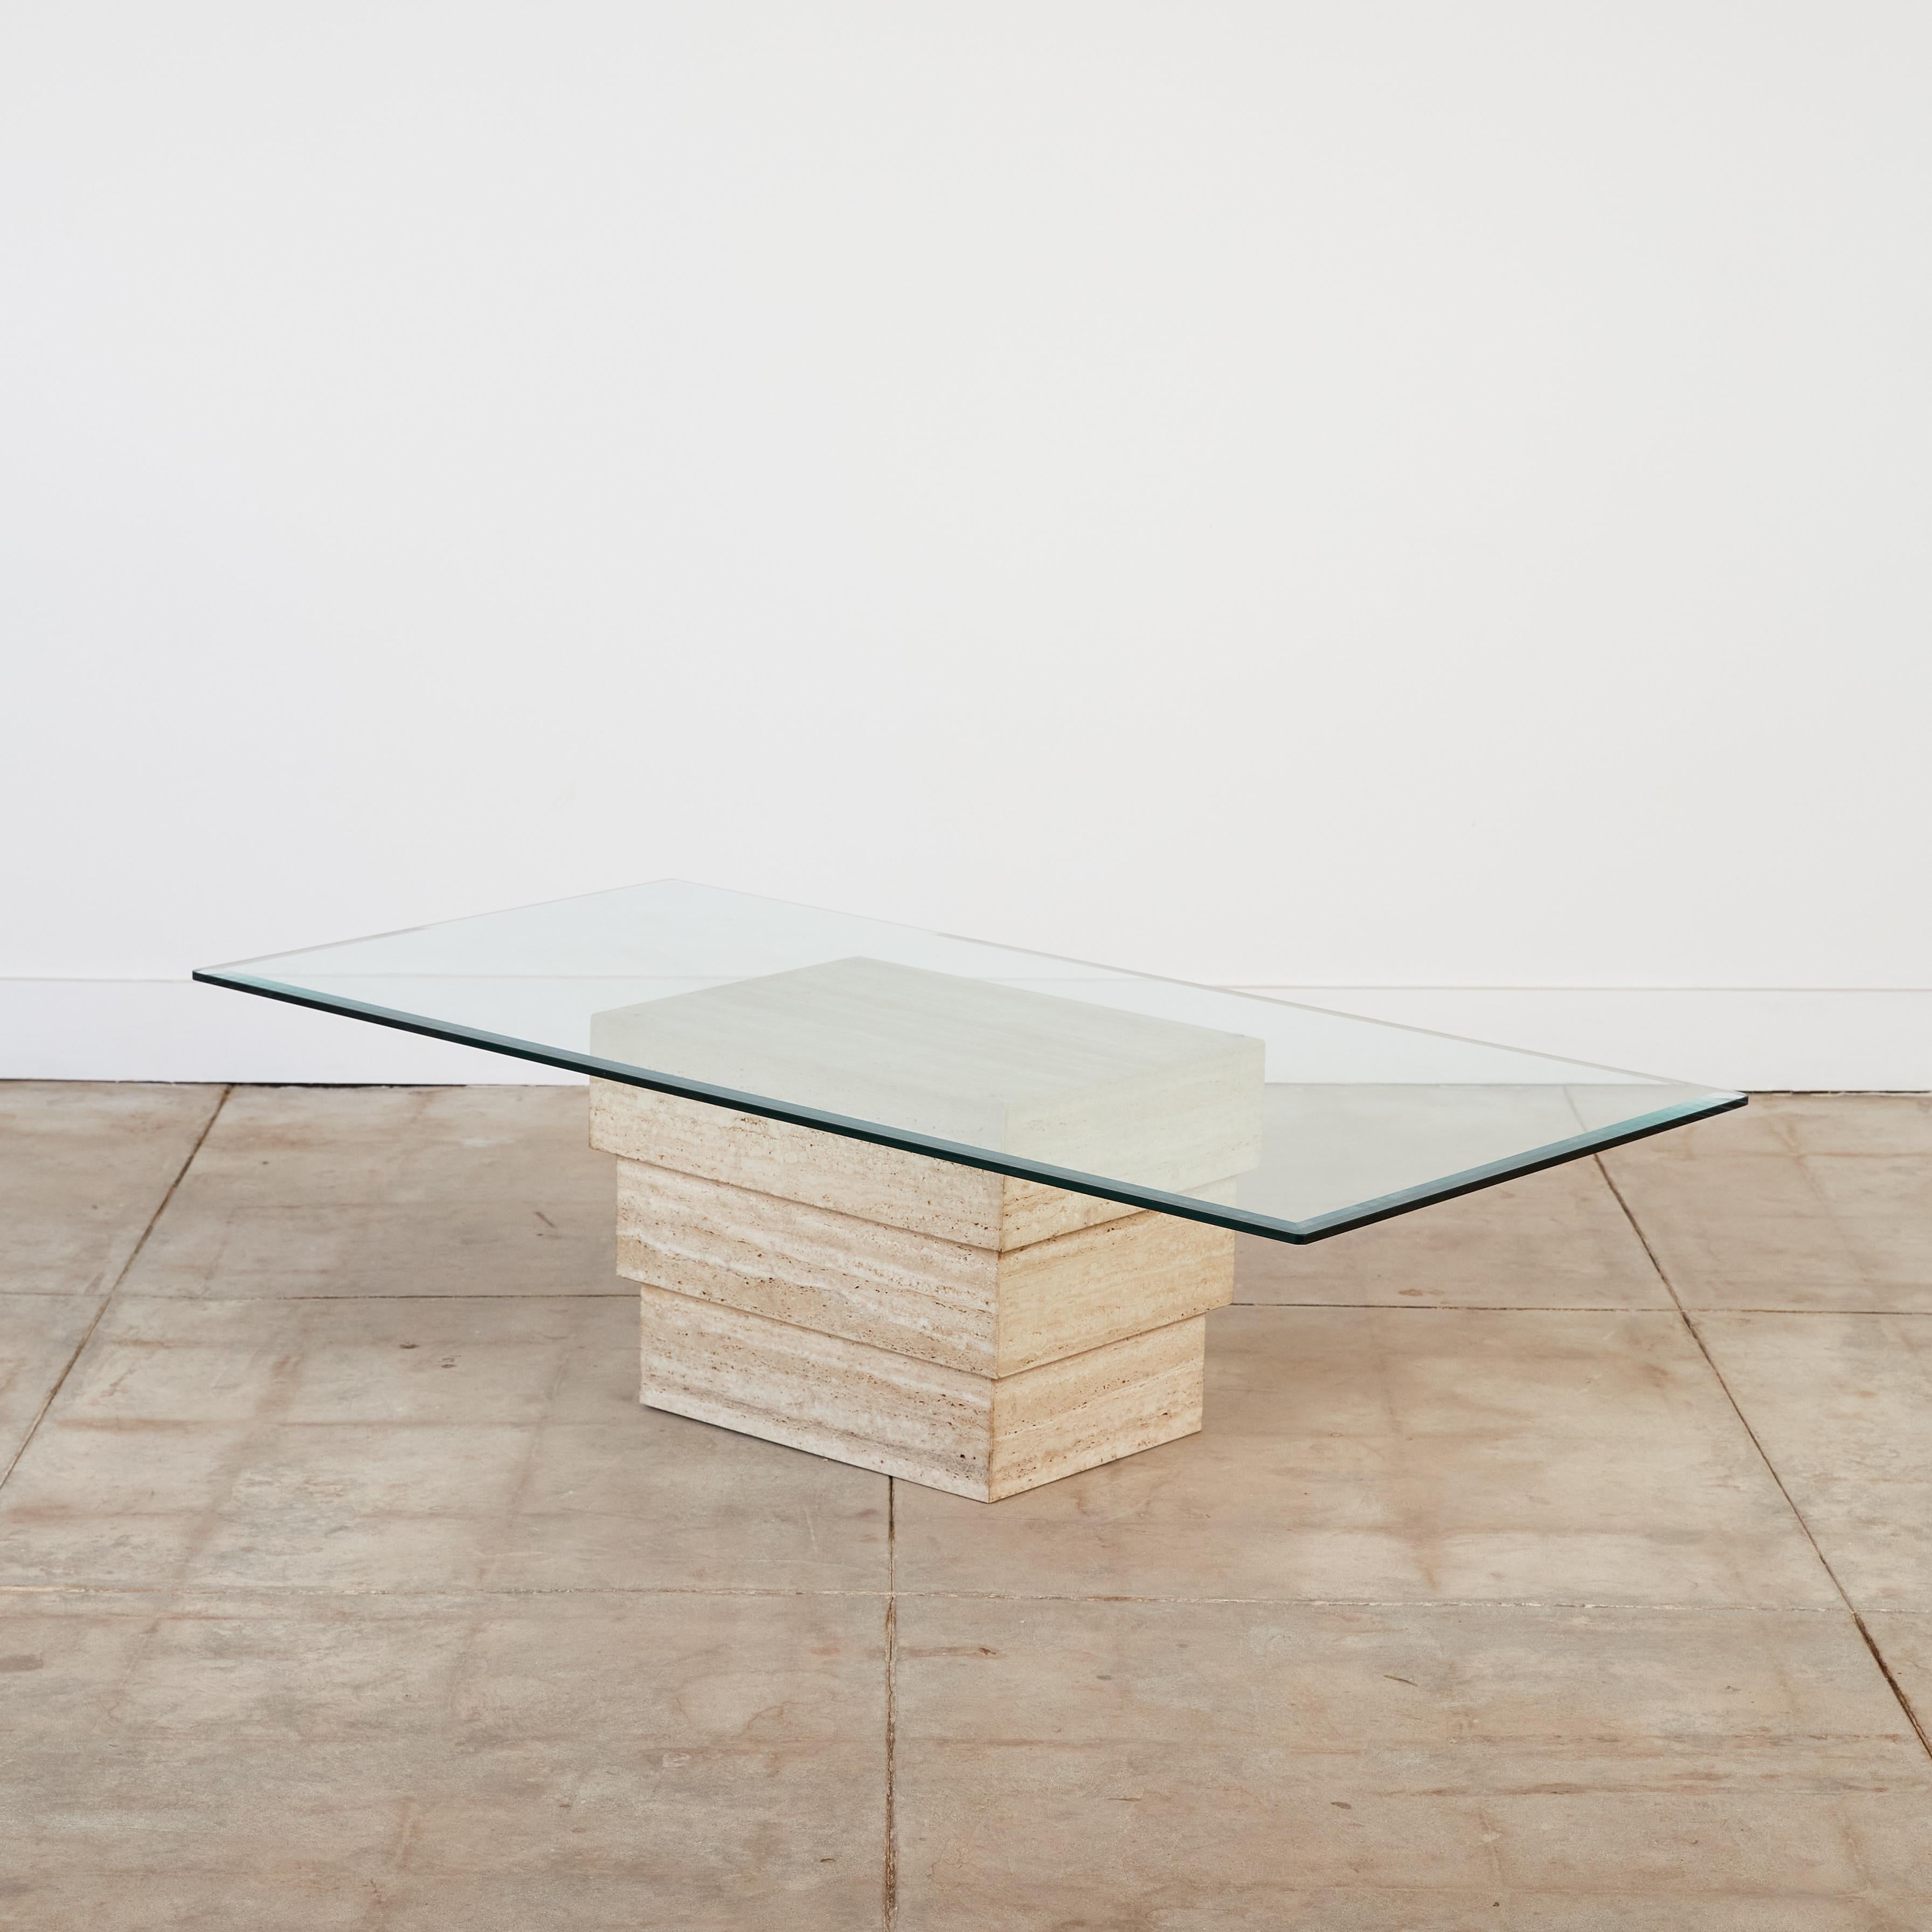 Coffee table with travertine base and glass top. This table features an ascending stacked tri-level travertine base with a rectangular bevel edged glass top. Can be used as a side table without the glass top.

Dimensions: 60” width x 30” depth x